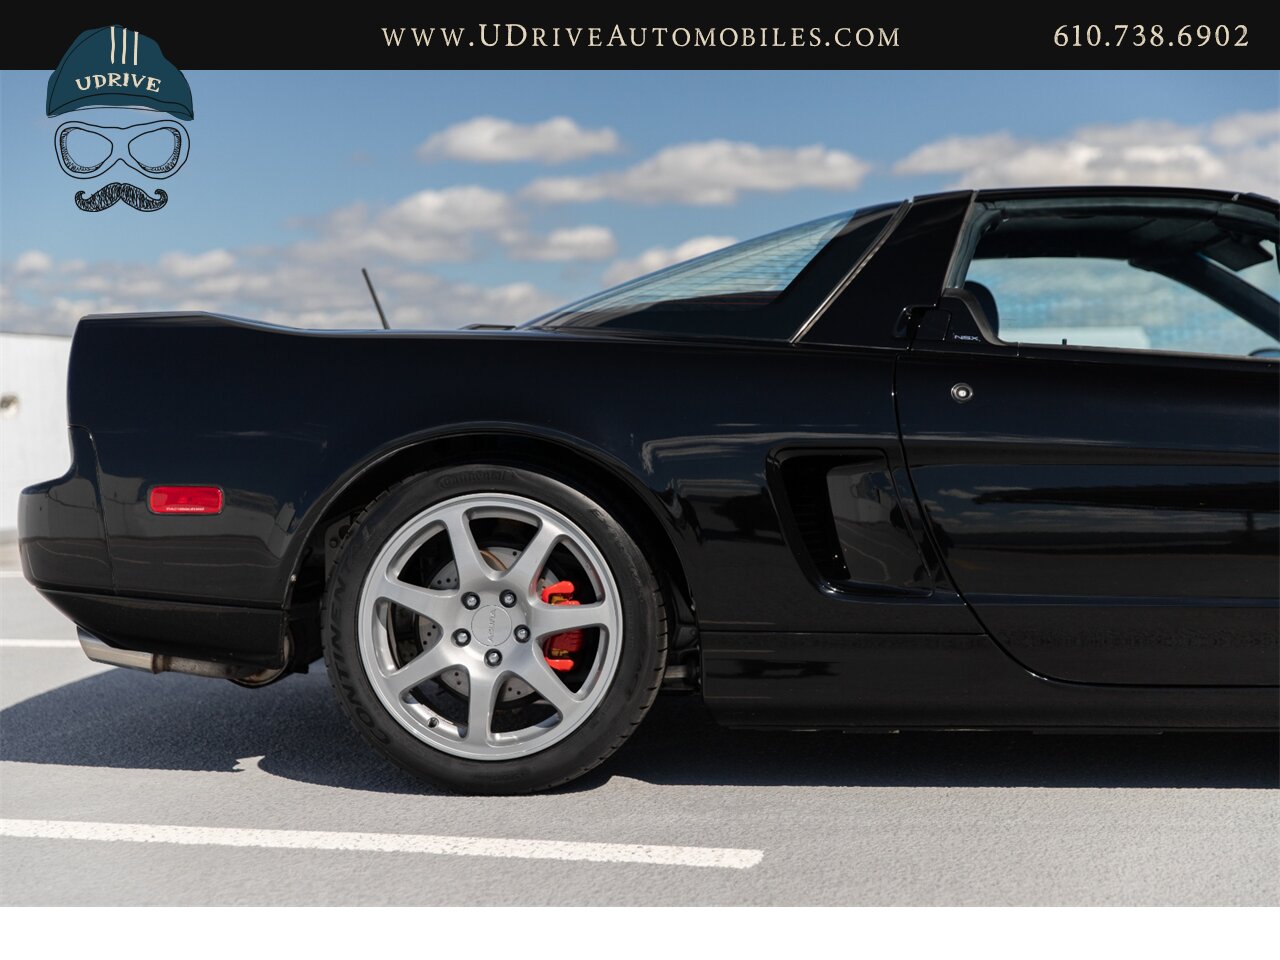 1996 Acura NSX NSX-T  5 Speed Manual Fresh Timing Belt Service - Photo 21 - West Chester, PA 19382